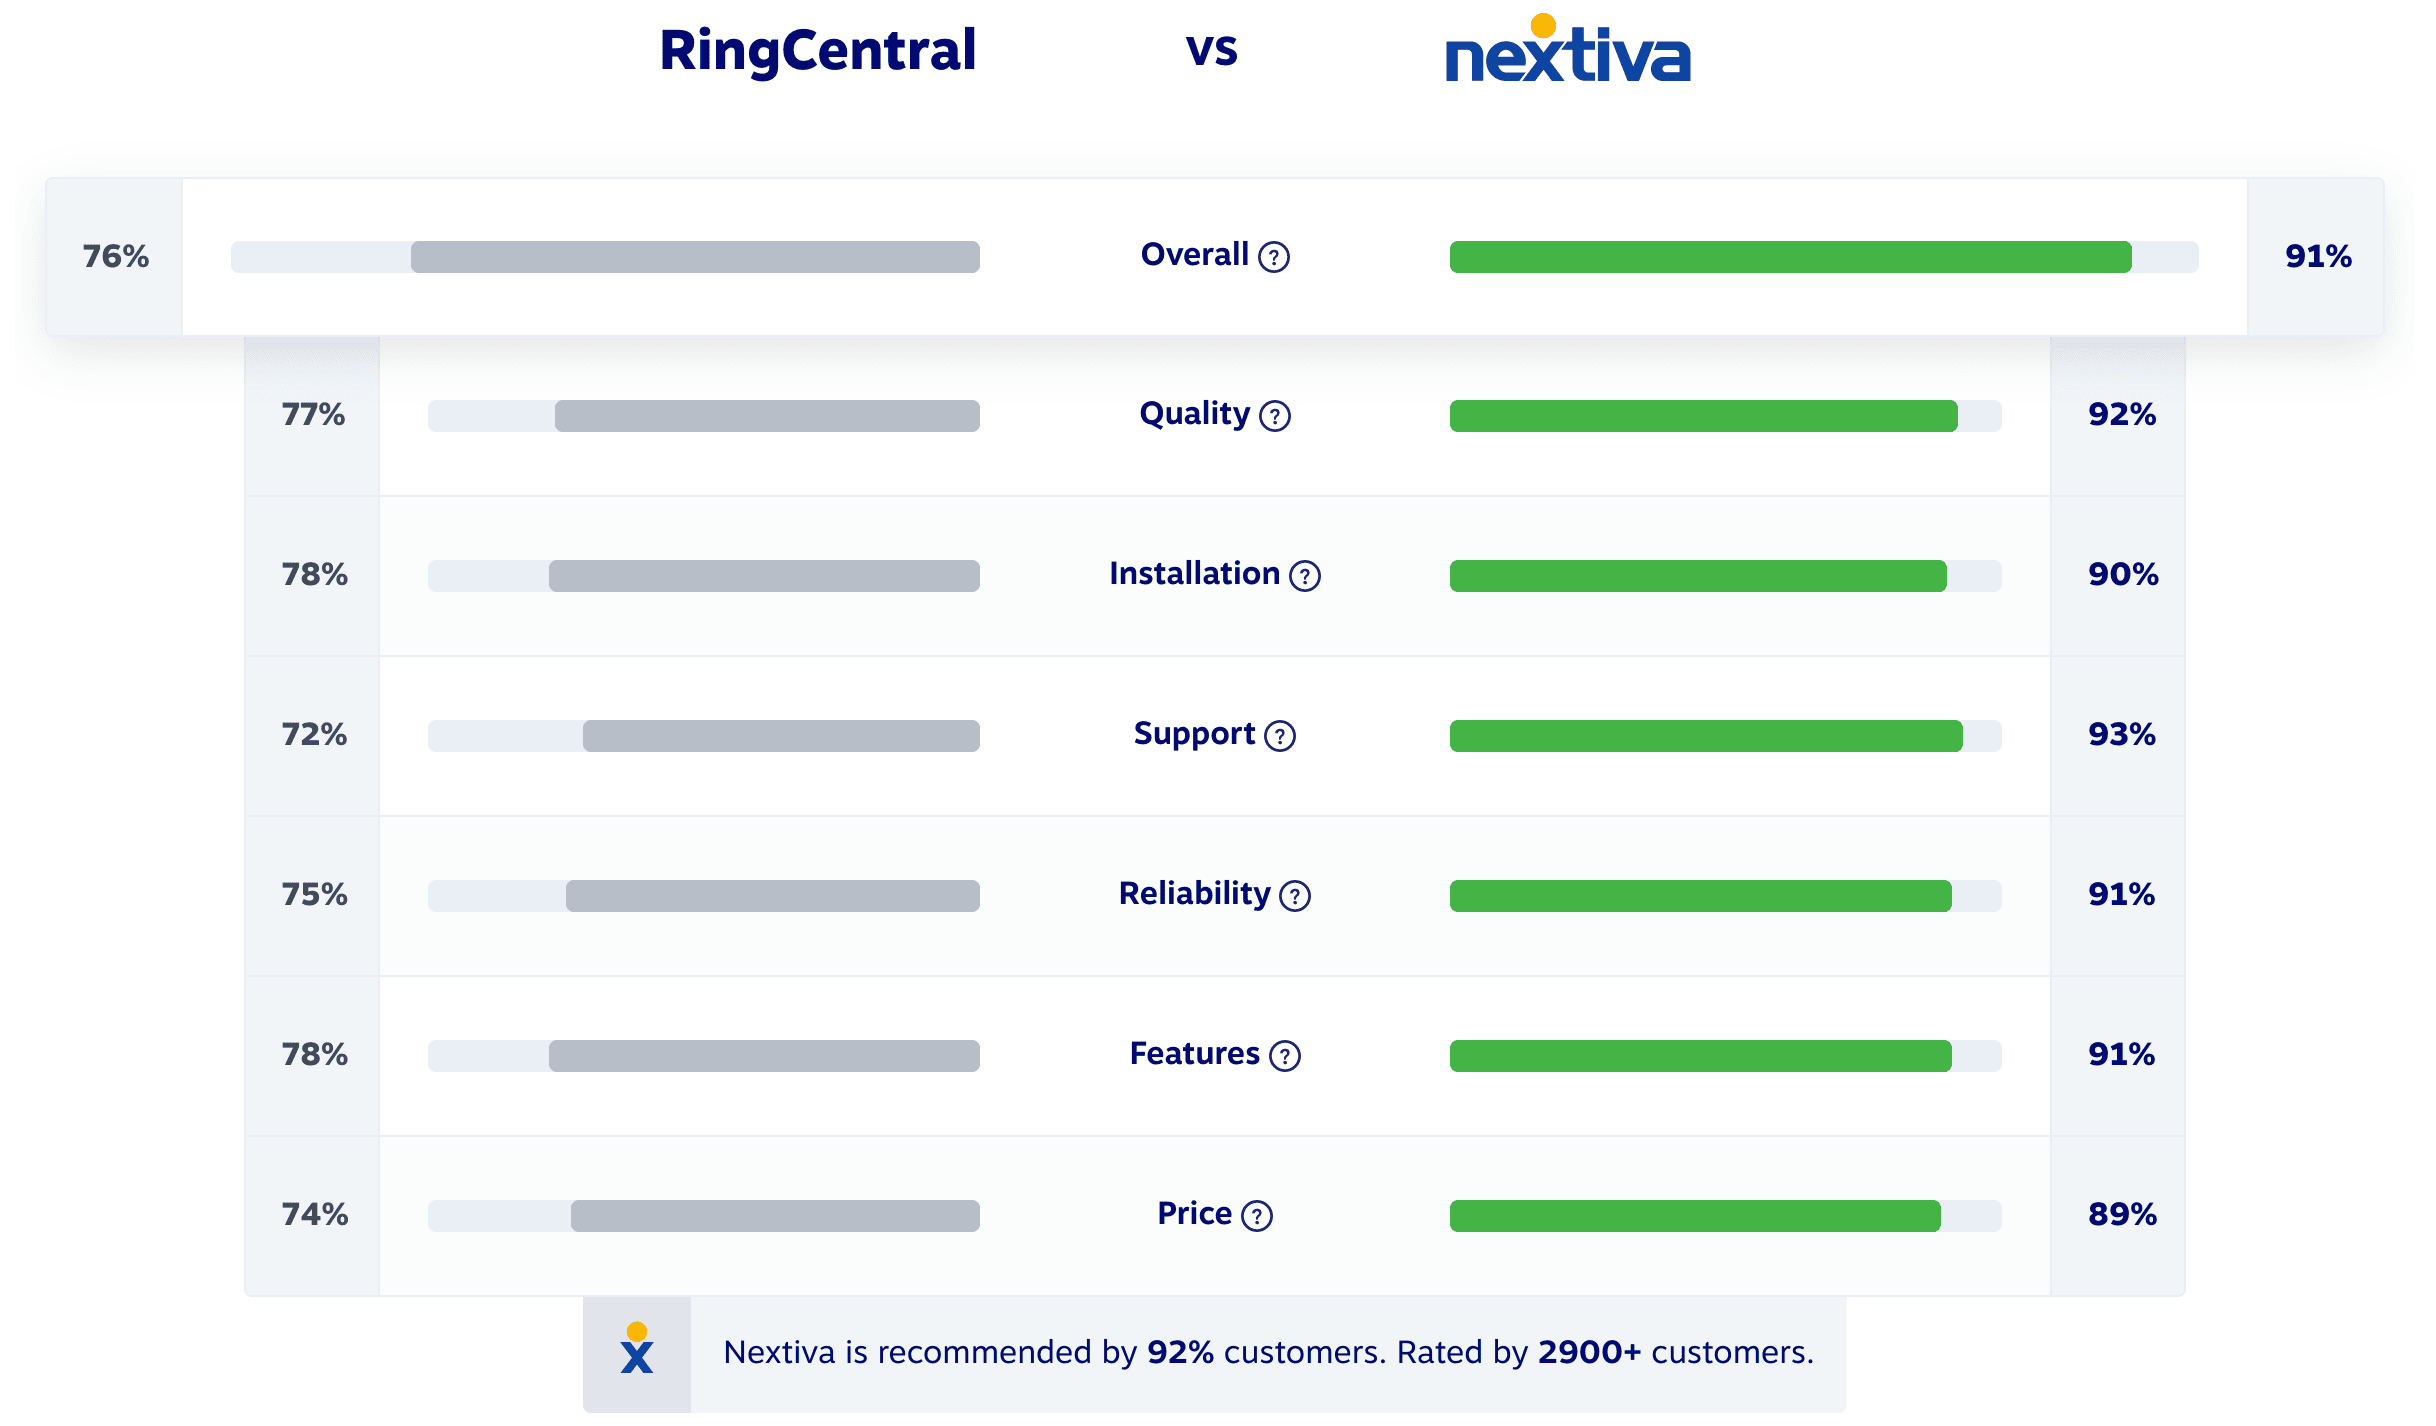 RingCentral vs. Nextiva: Which Phone Provider Is Best?